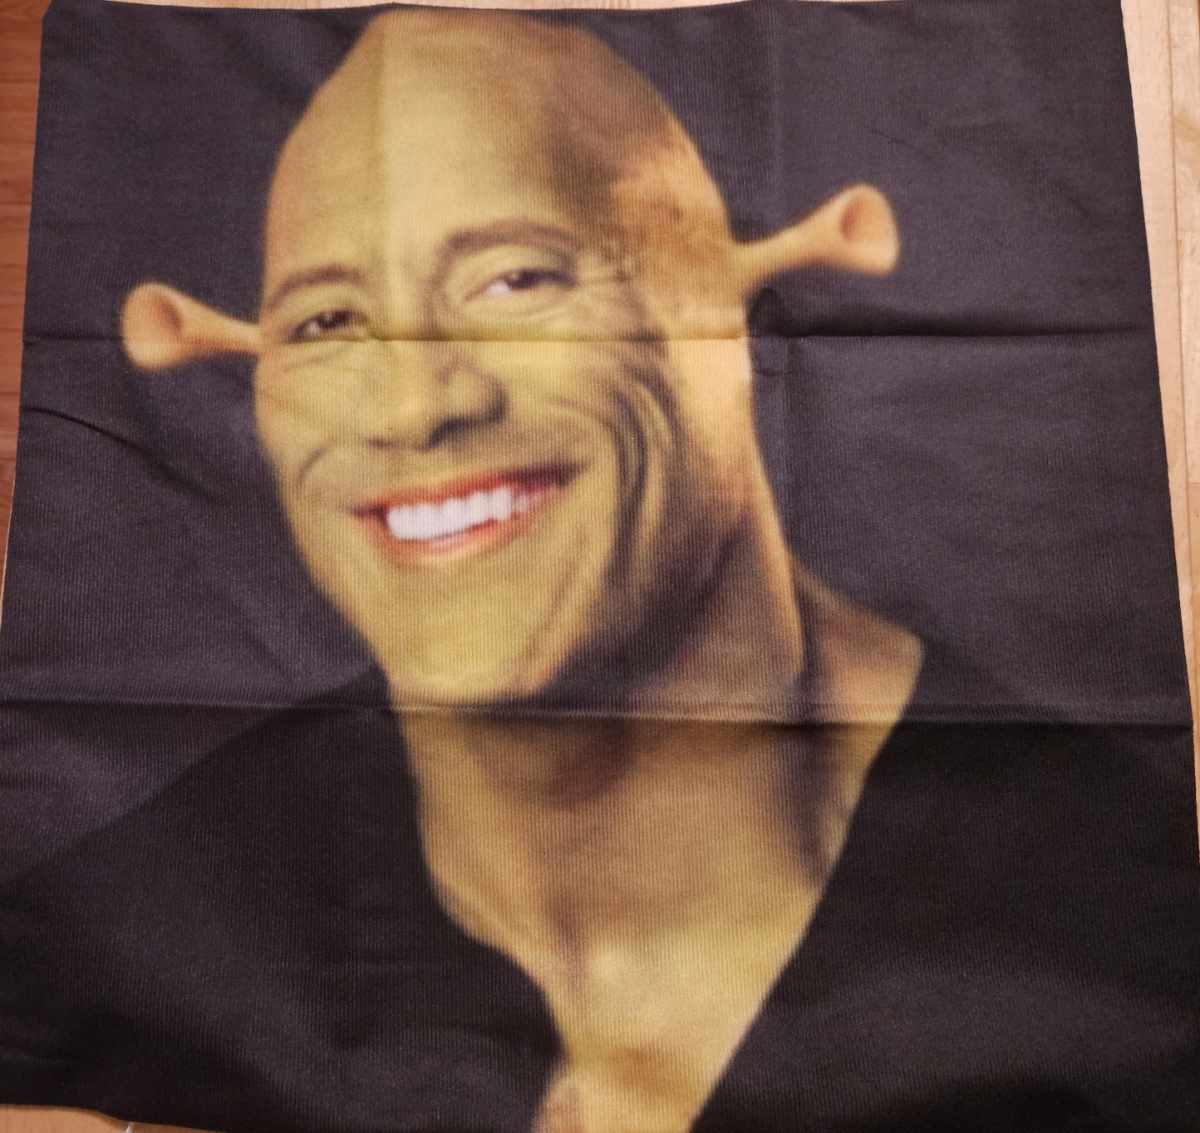 My wife ordered a Squidward wall hanging for her sister but was sent this pillow case instead!